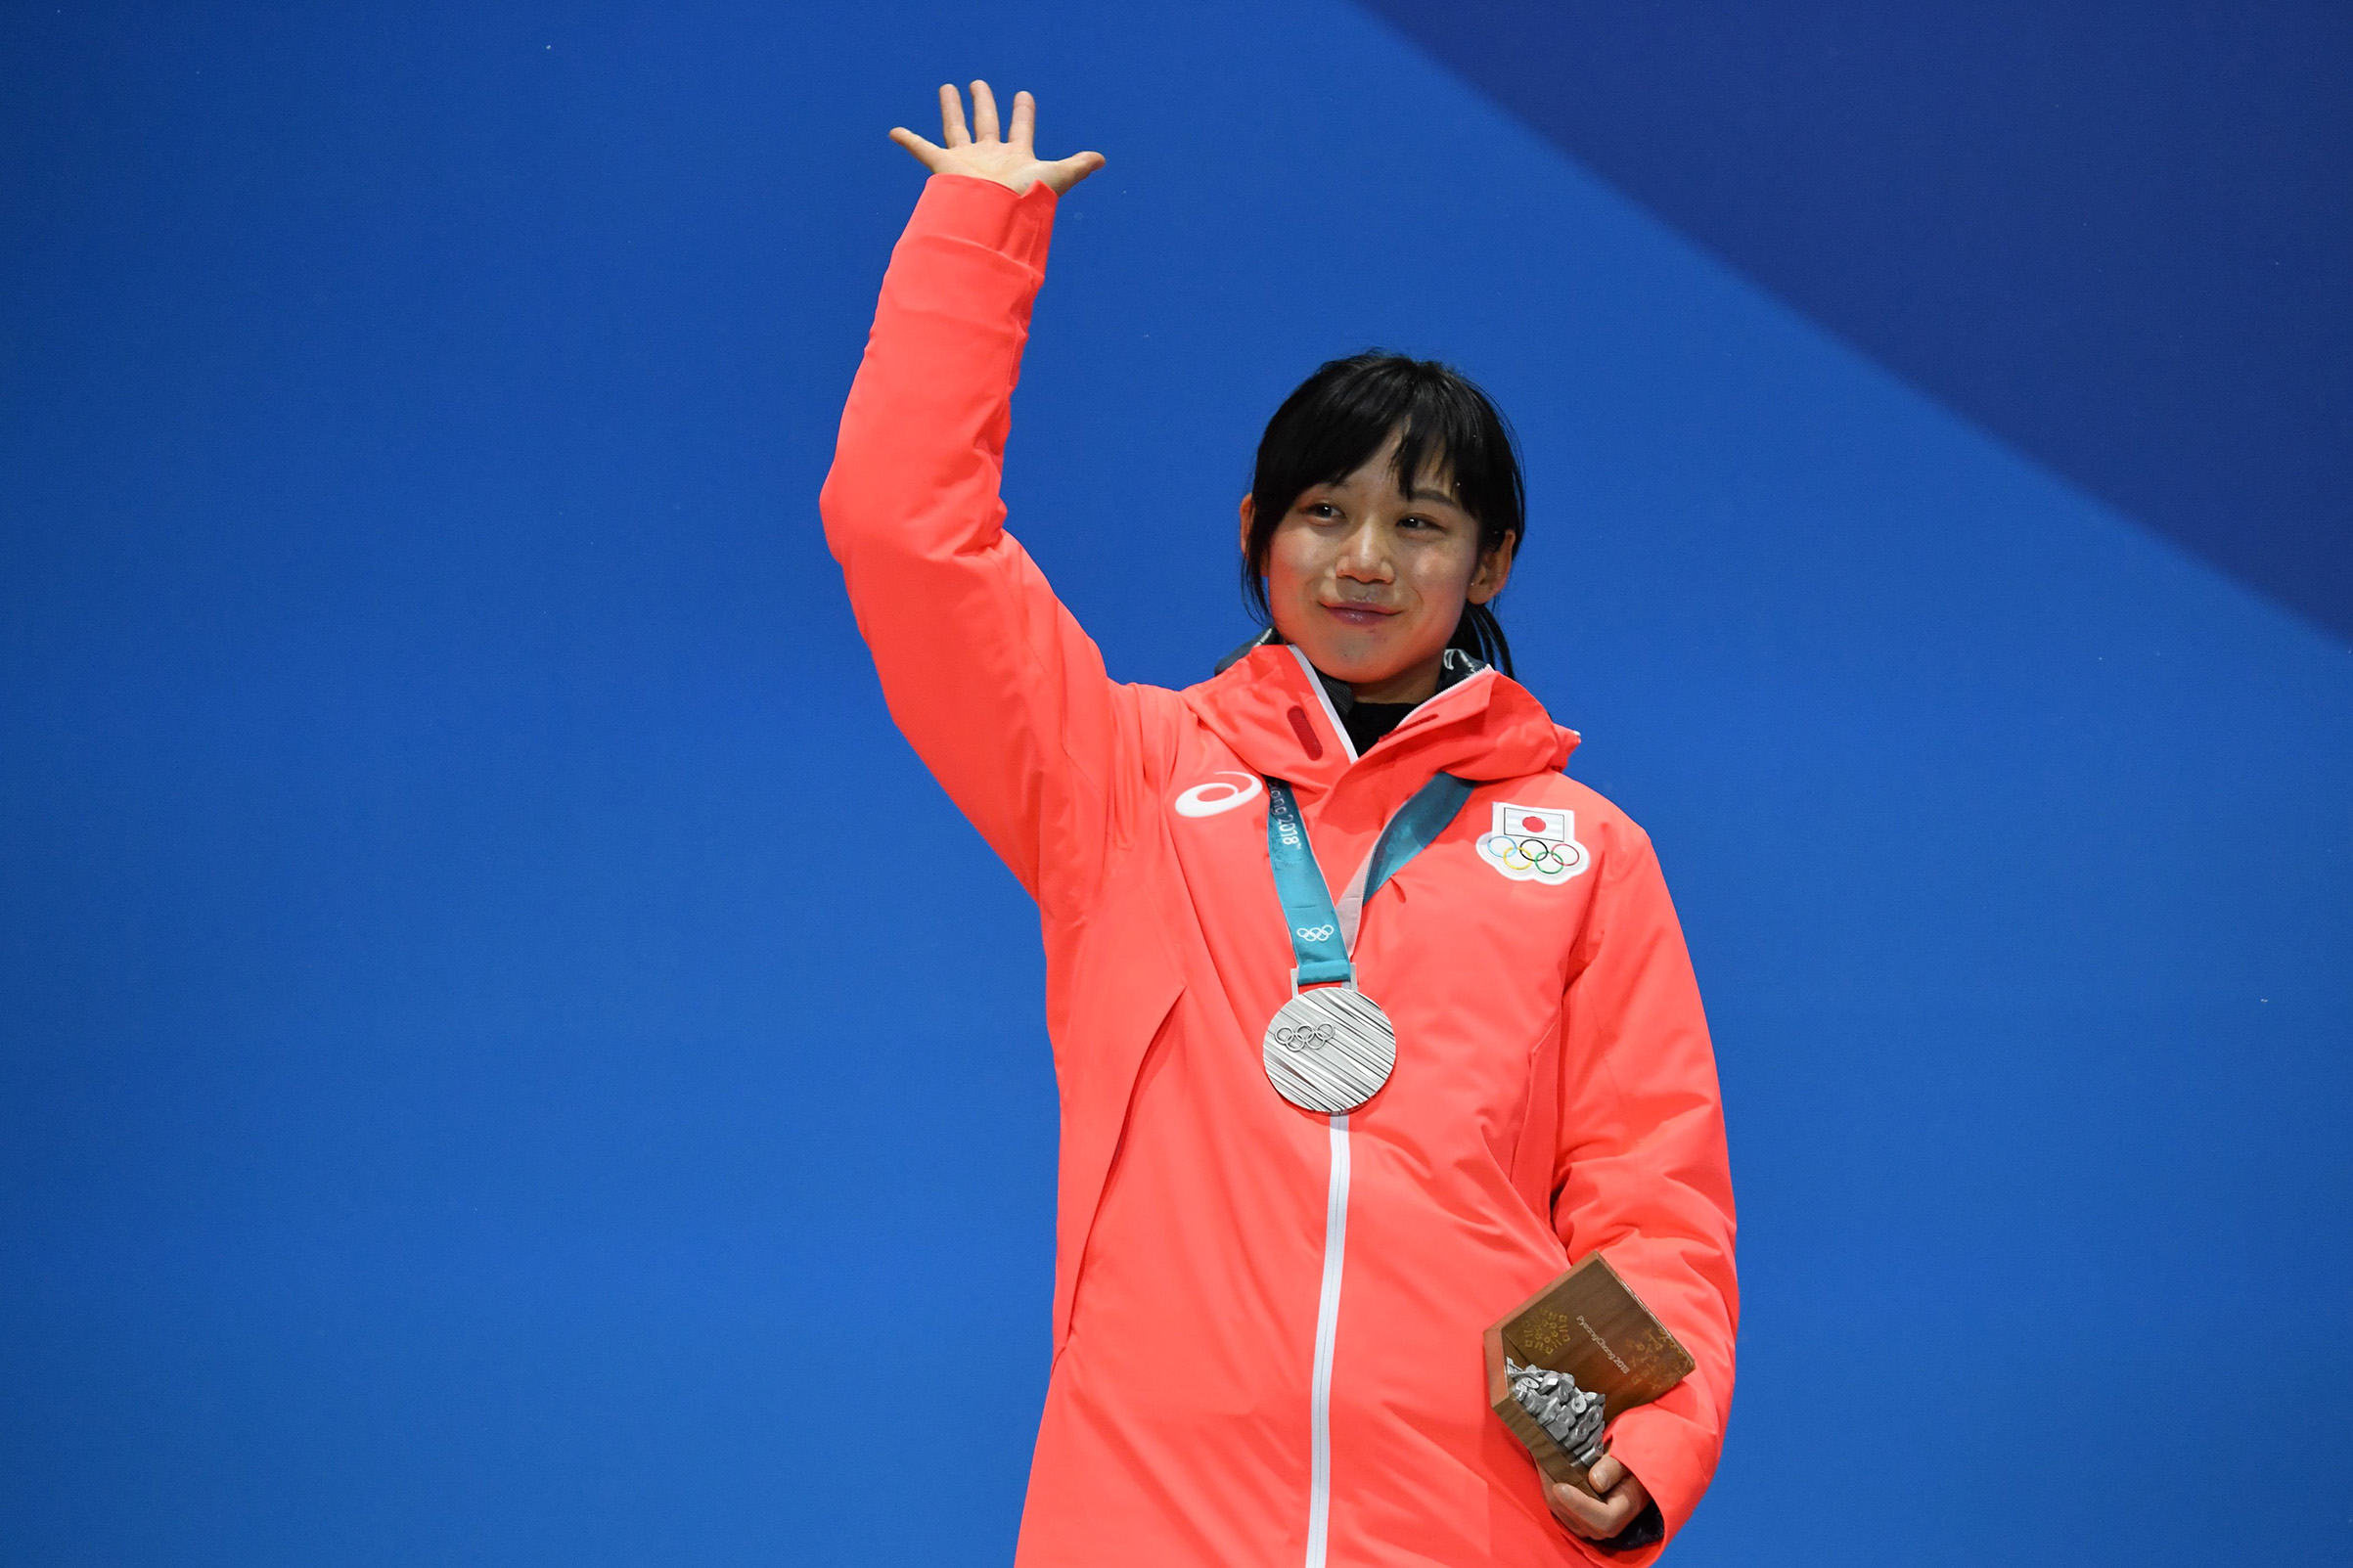 Japan's silver medallist Miho Takagi waves on the podium during the medal ceremony for the speed skating women's 1500m on Feb. 13, 2018. (Kirill Kudryavtsev—AFP/Getty Images:)